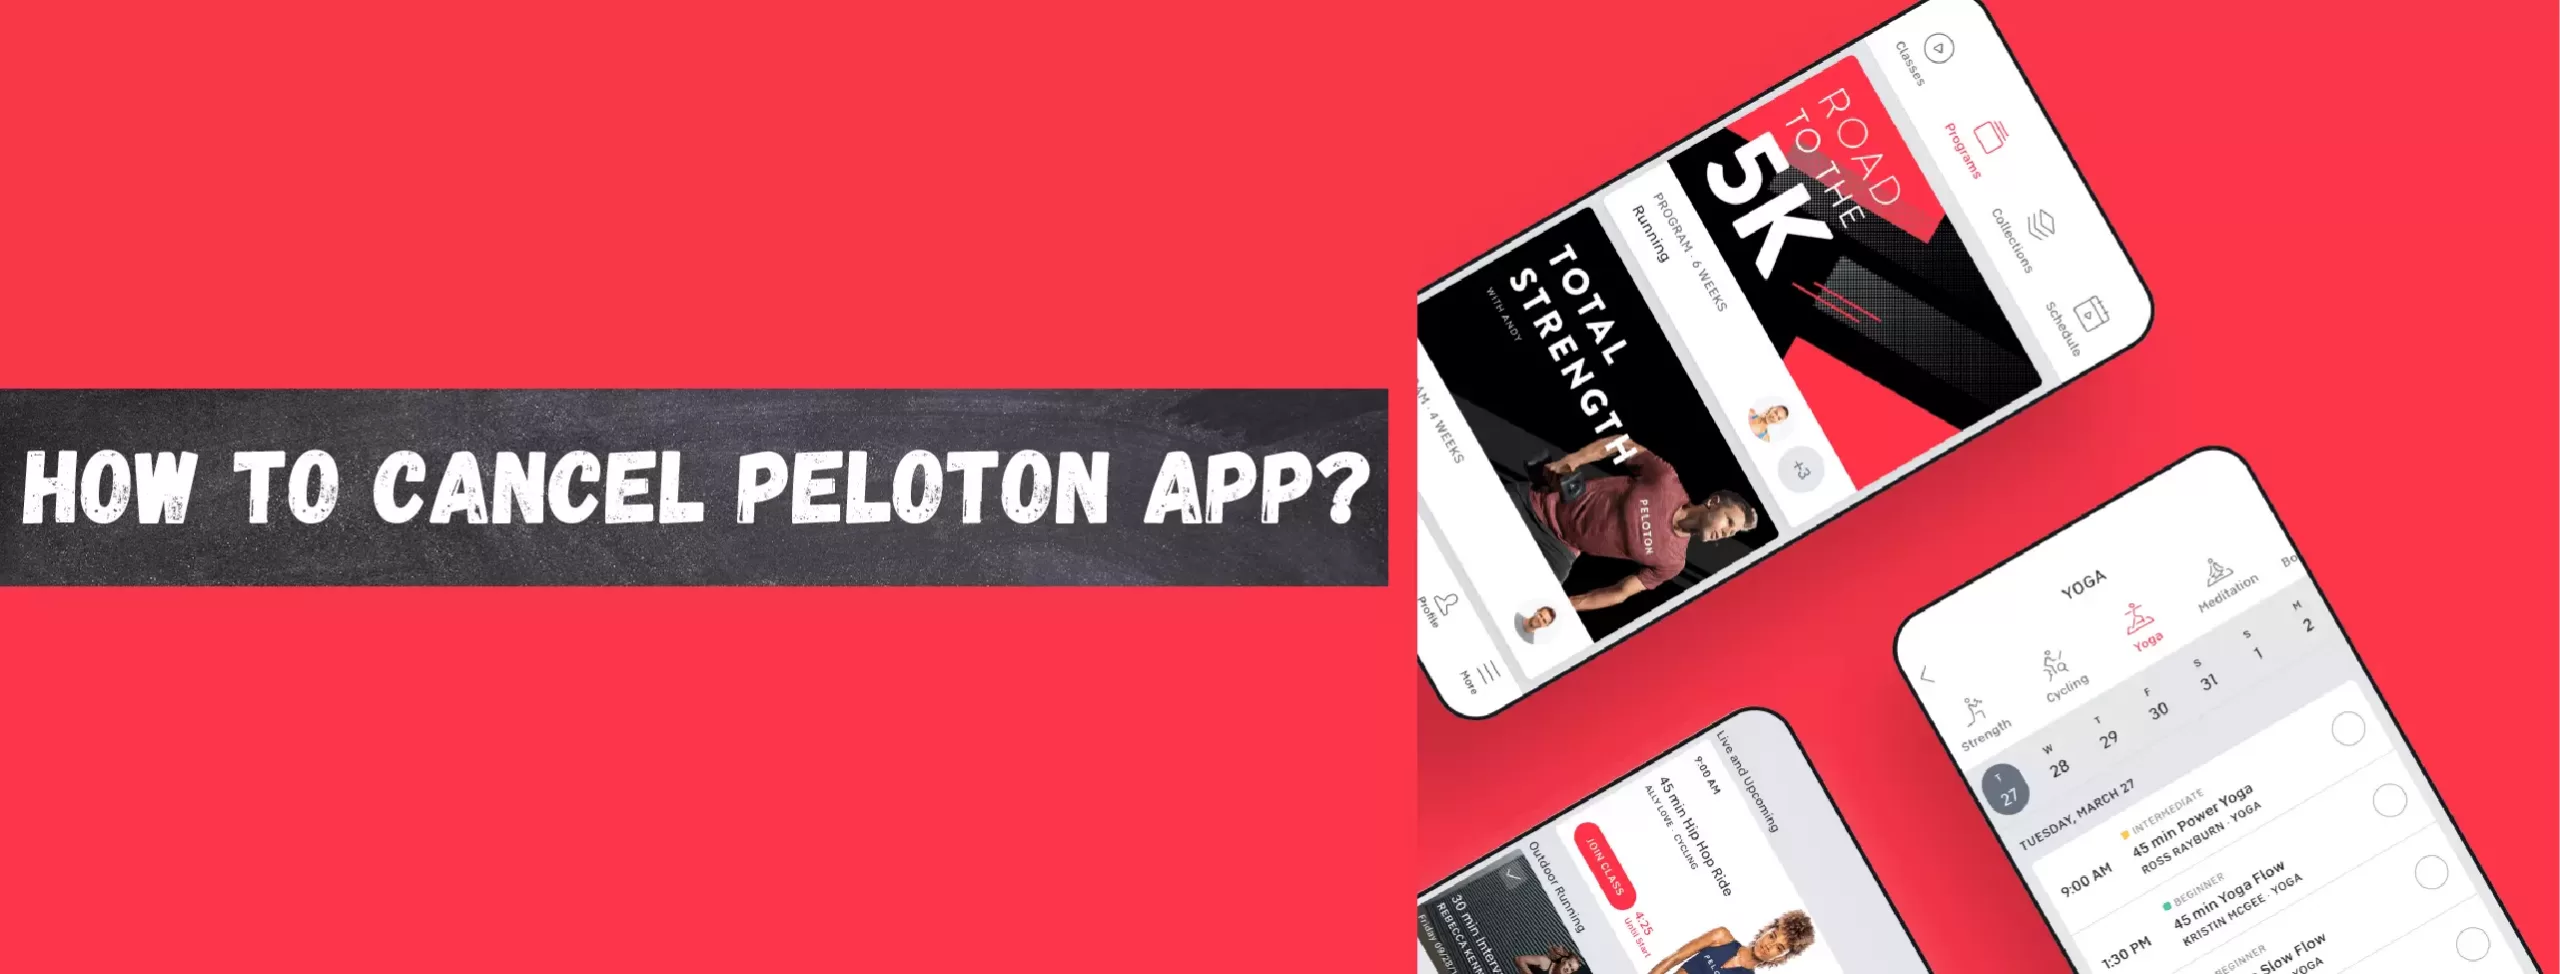 How To Cancel Peloton App?,how to unsubscribe from peloton app,how to cancel peloton app membership,how do i cancel my peloton app subscription,how to remove peloton workouts from apple watch,how to peloton app on tv,how to remove peloton from health app,how to cancel peloton subscription through apple,how to cancel peloton app subscription,How To Cancel Peloton App